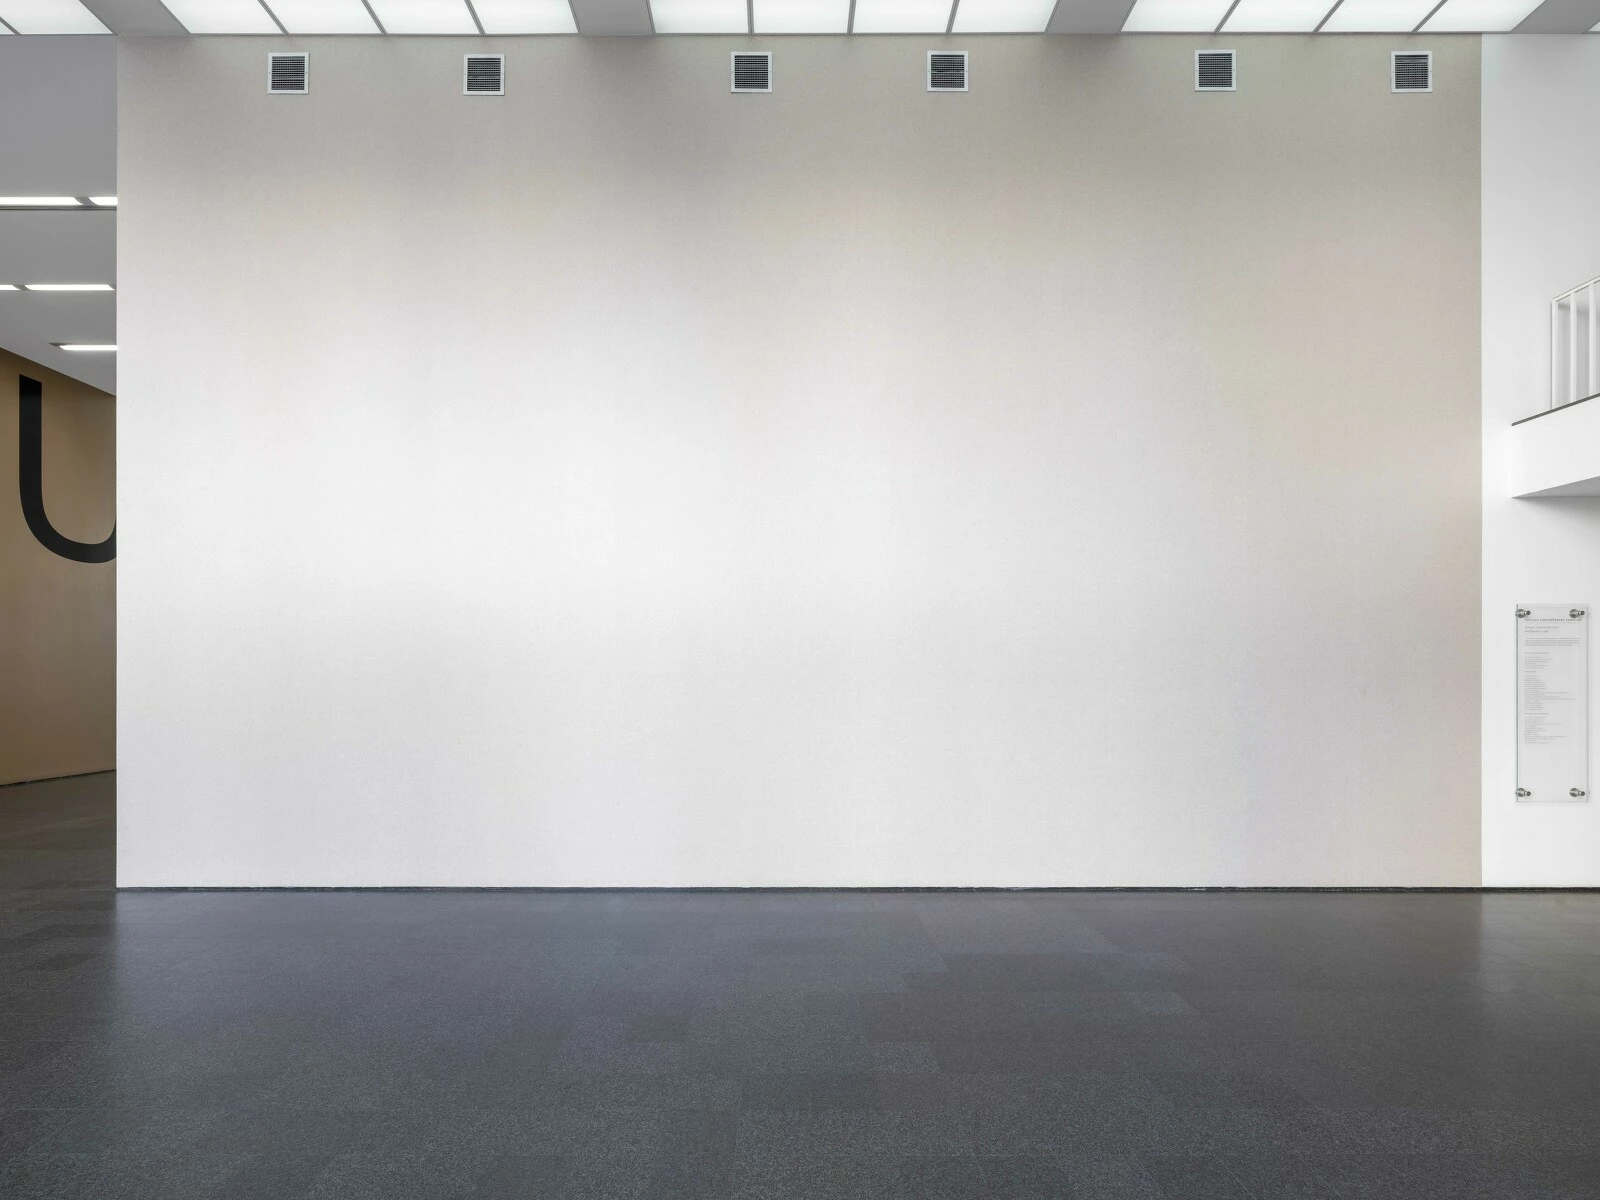 A seemingly off-white wall in an empty, airy space.